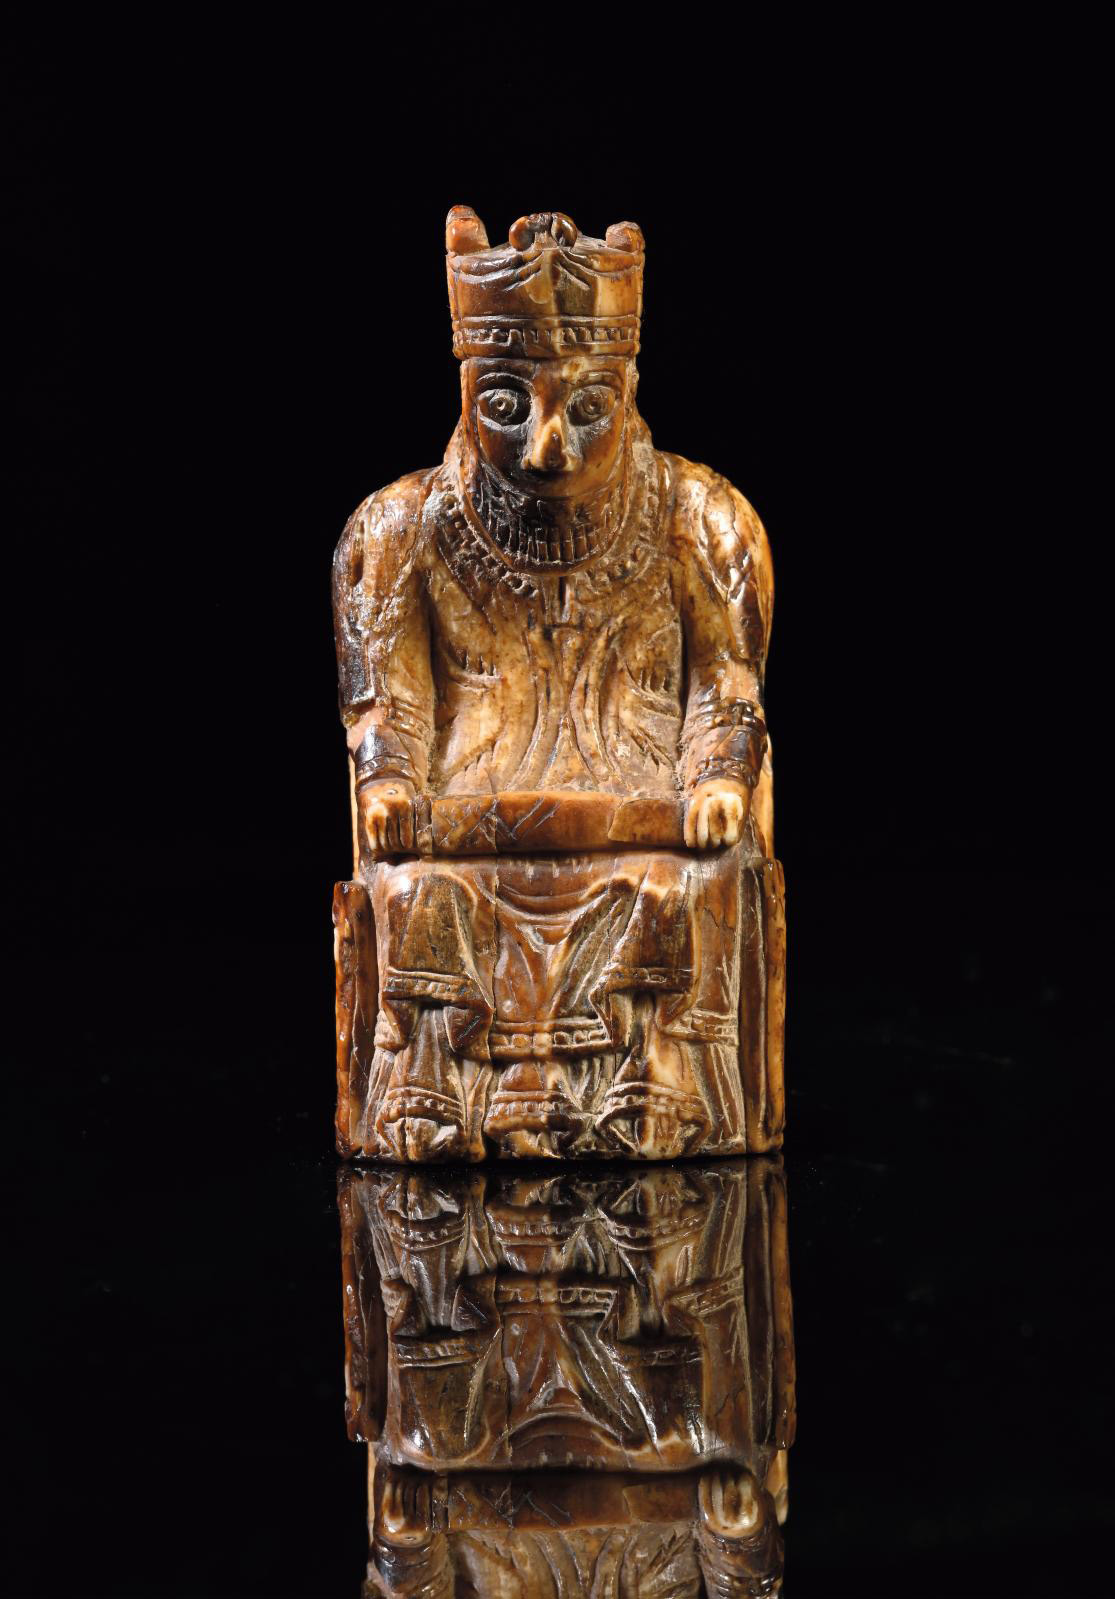 A 13-Century Norwegian Chess Piece: May the Best Player Win!